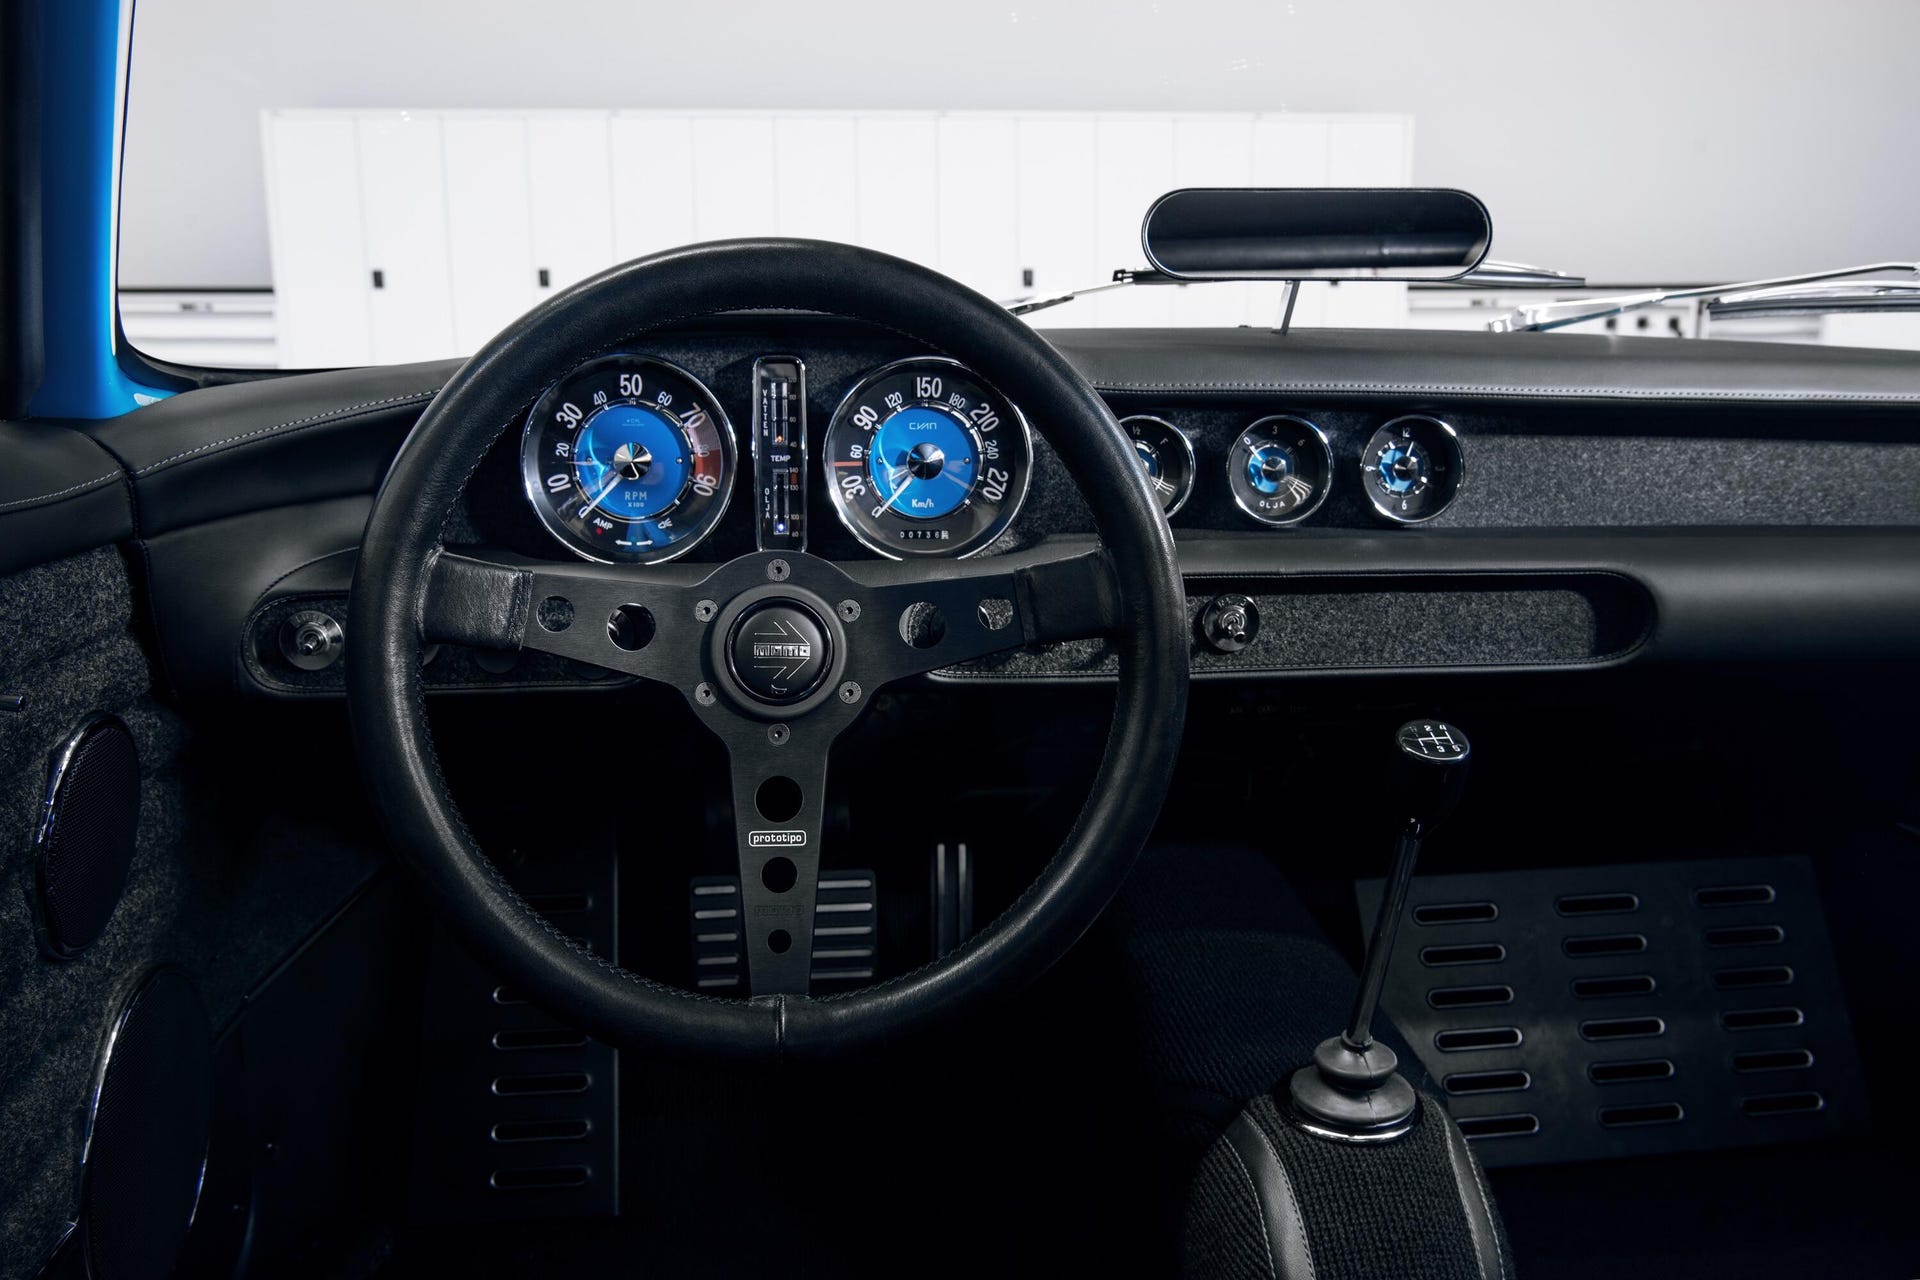 Cyan Racing Volvo P1800 dashboard and instrument cluster